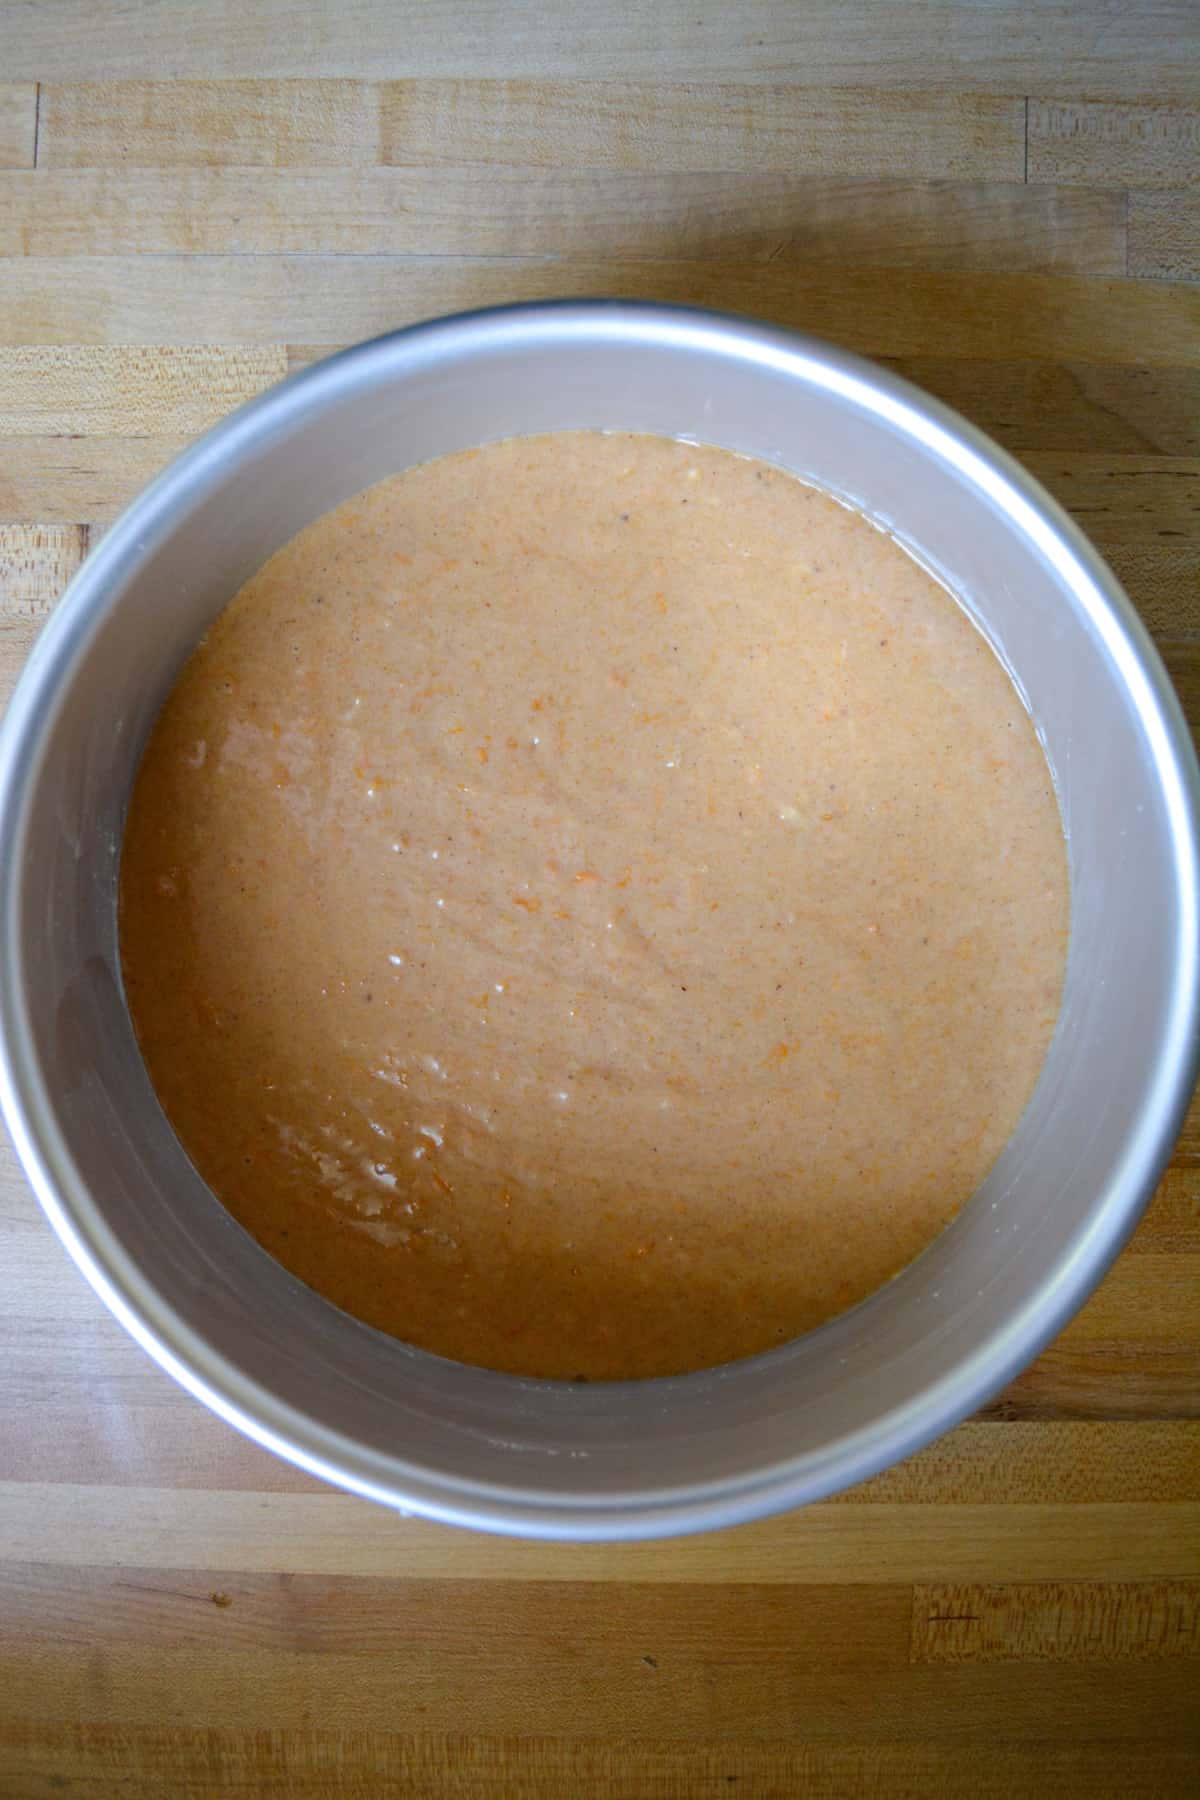 Pour the batter into a prepared 8" round cake pan and bake!